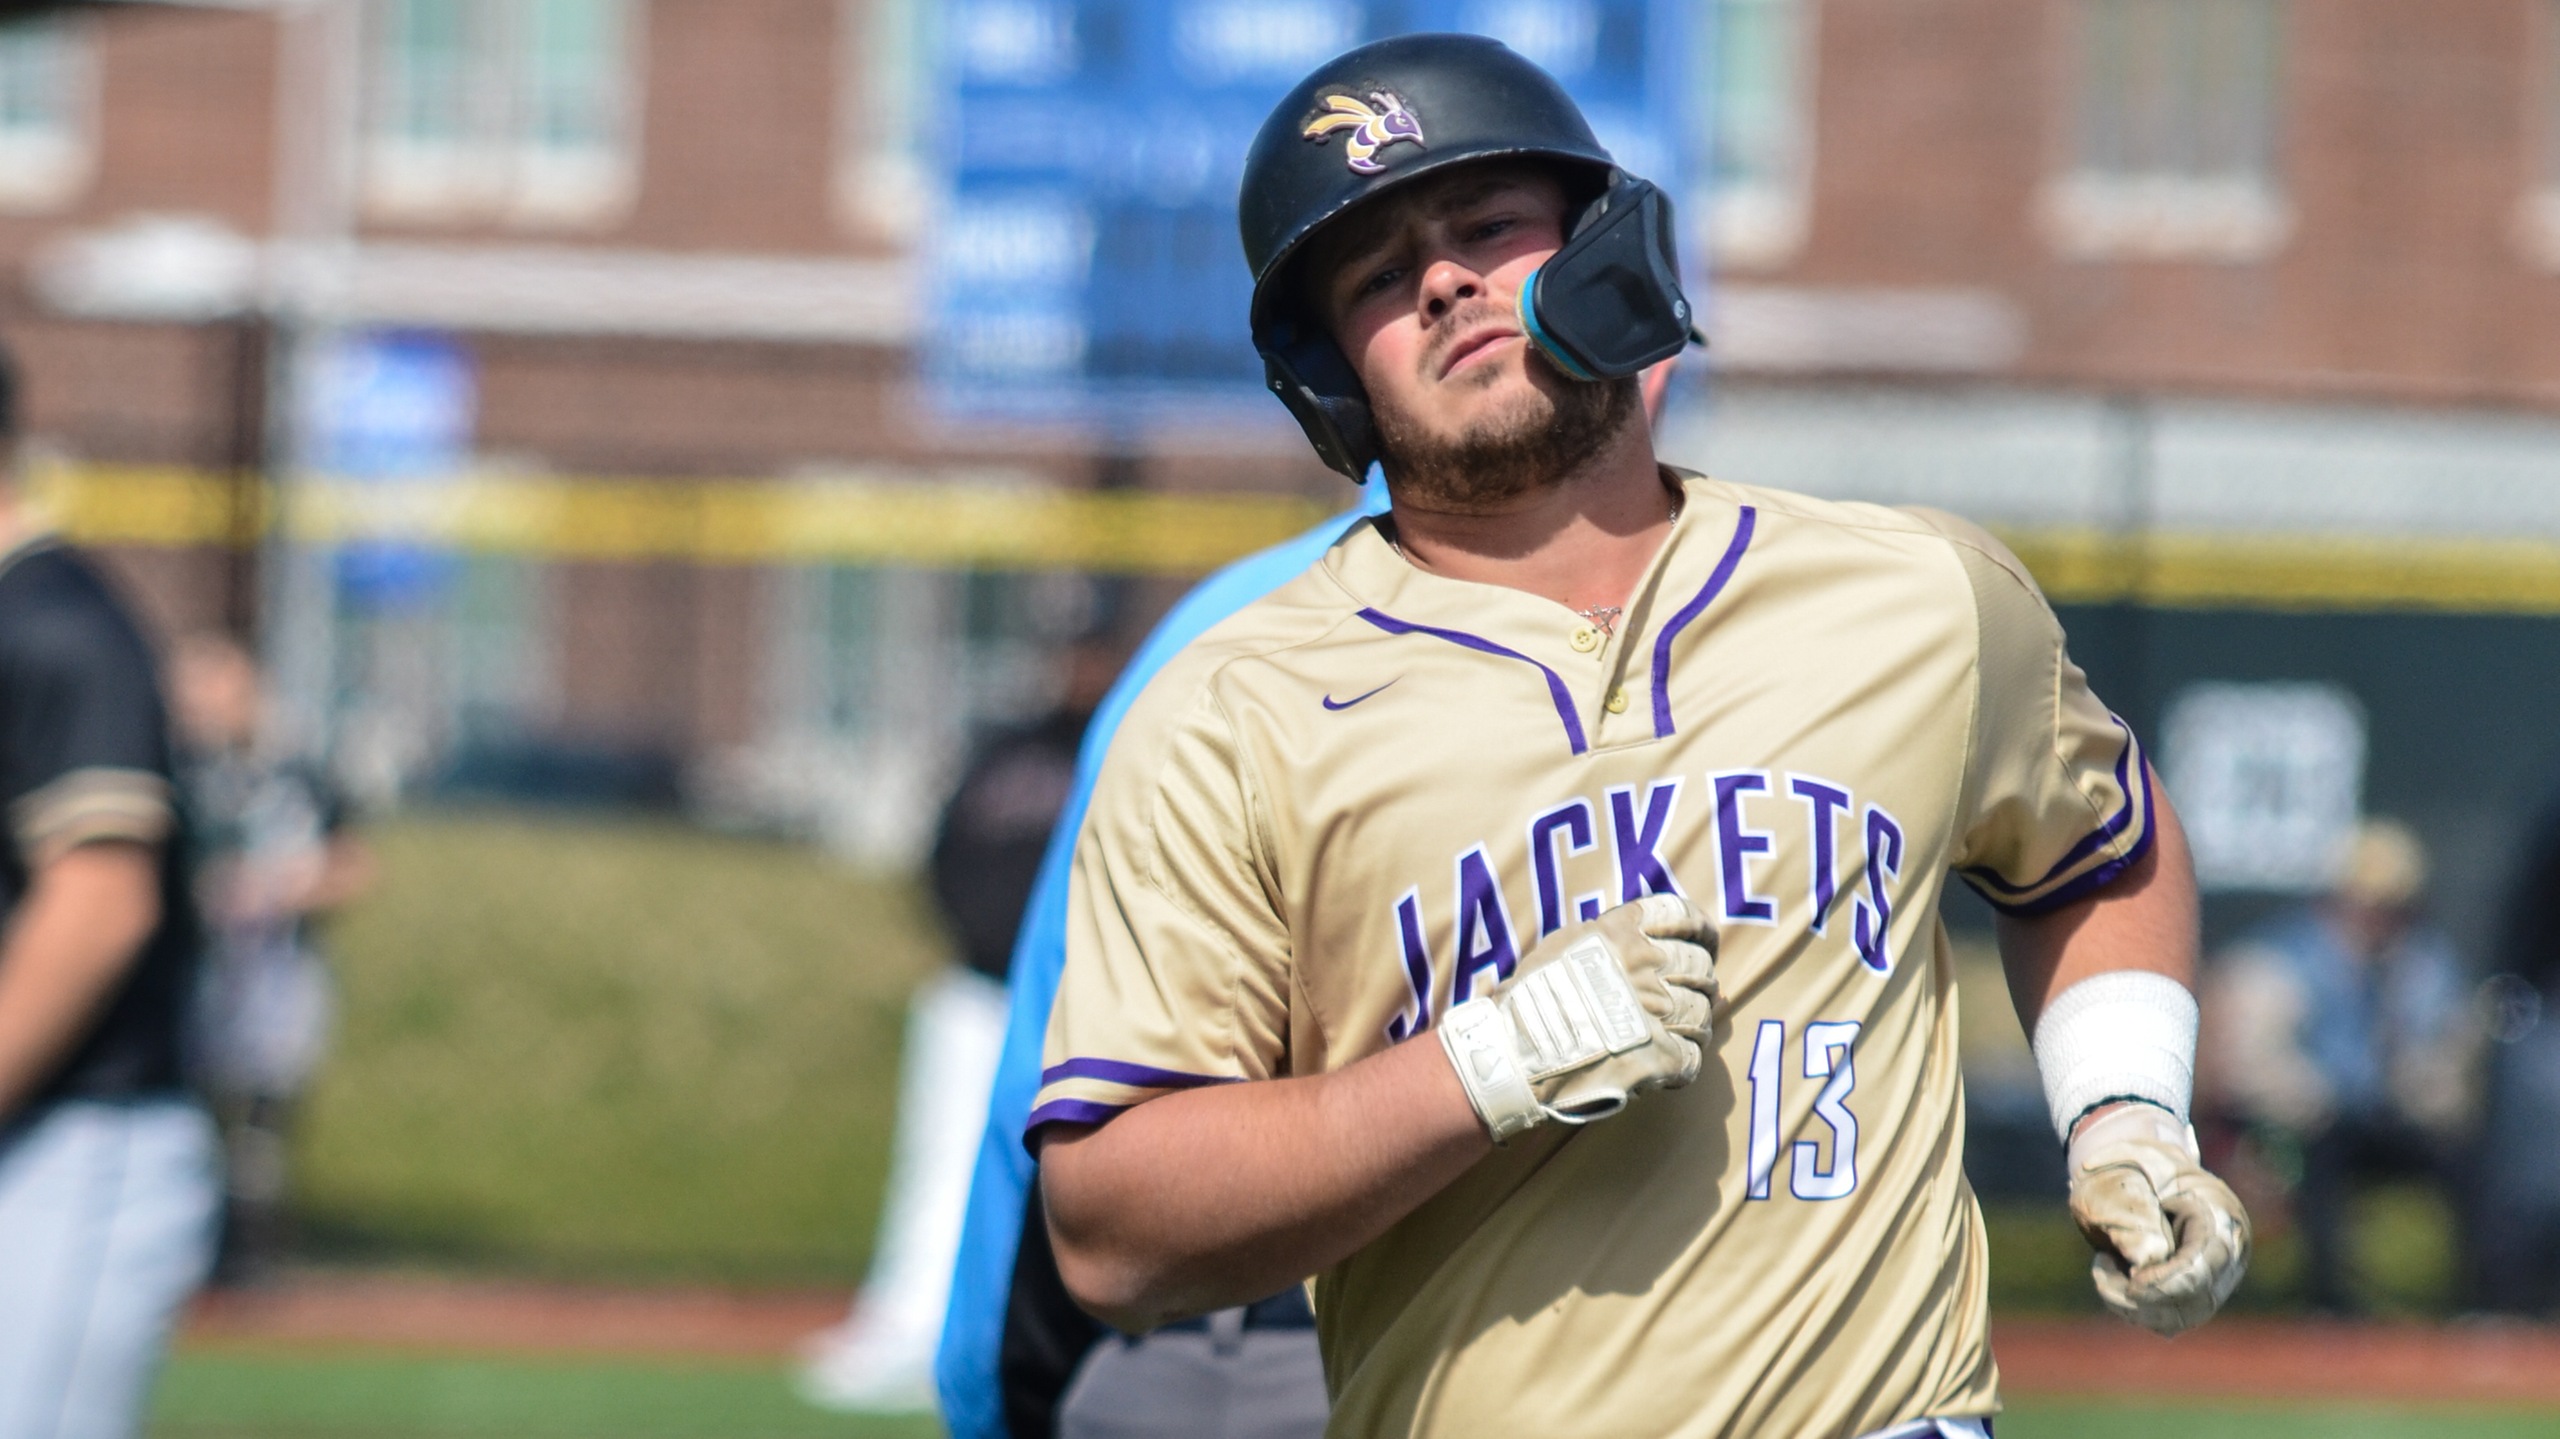 Yellow Jackets swept in doubleheader at Earlham